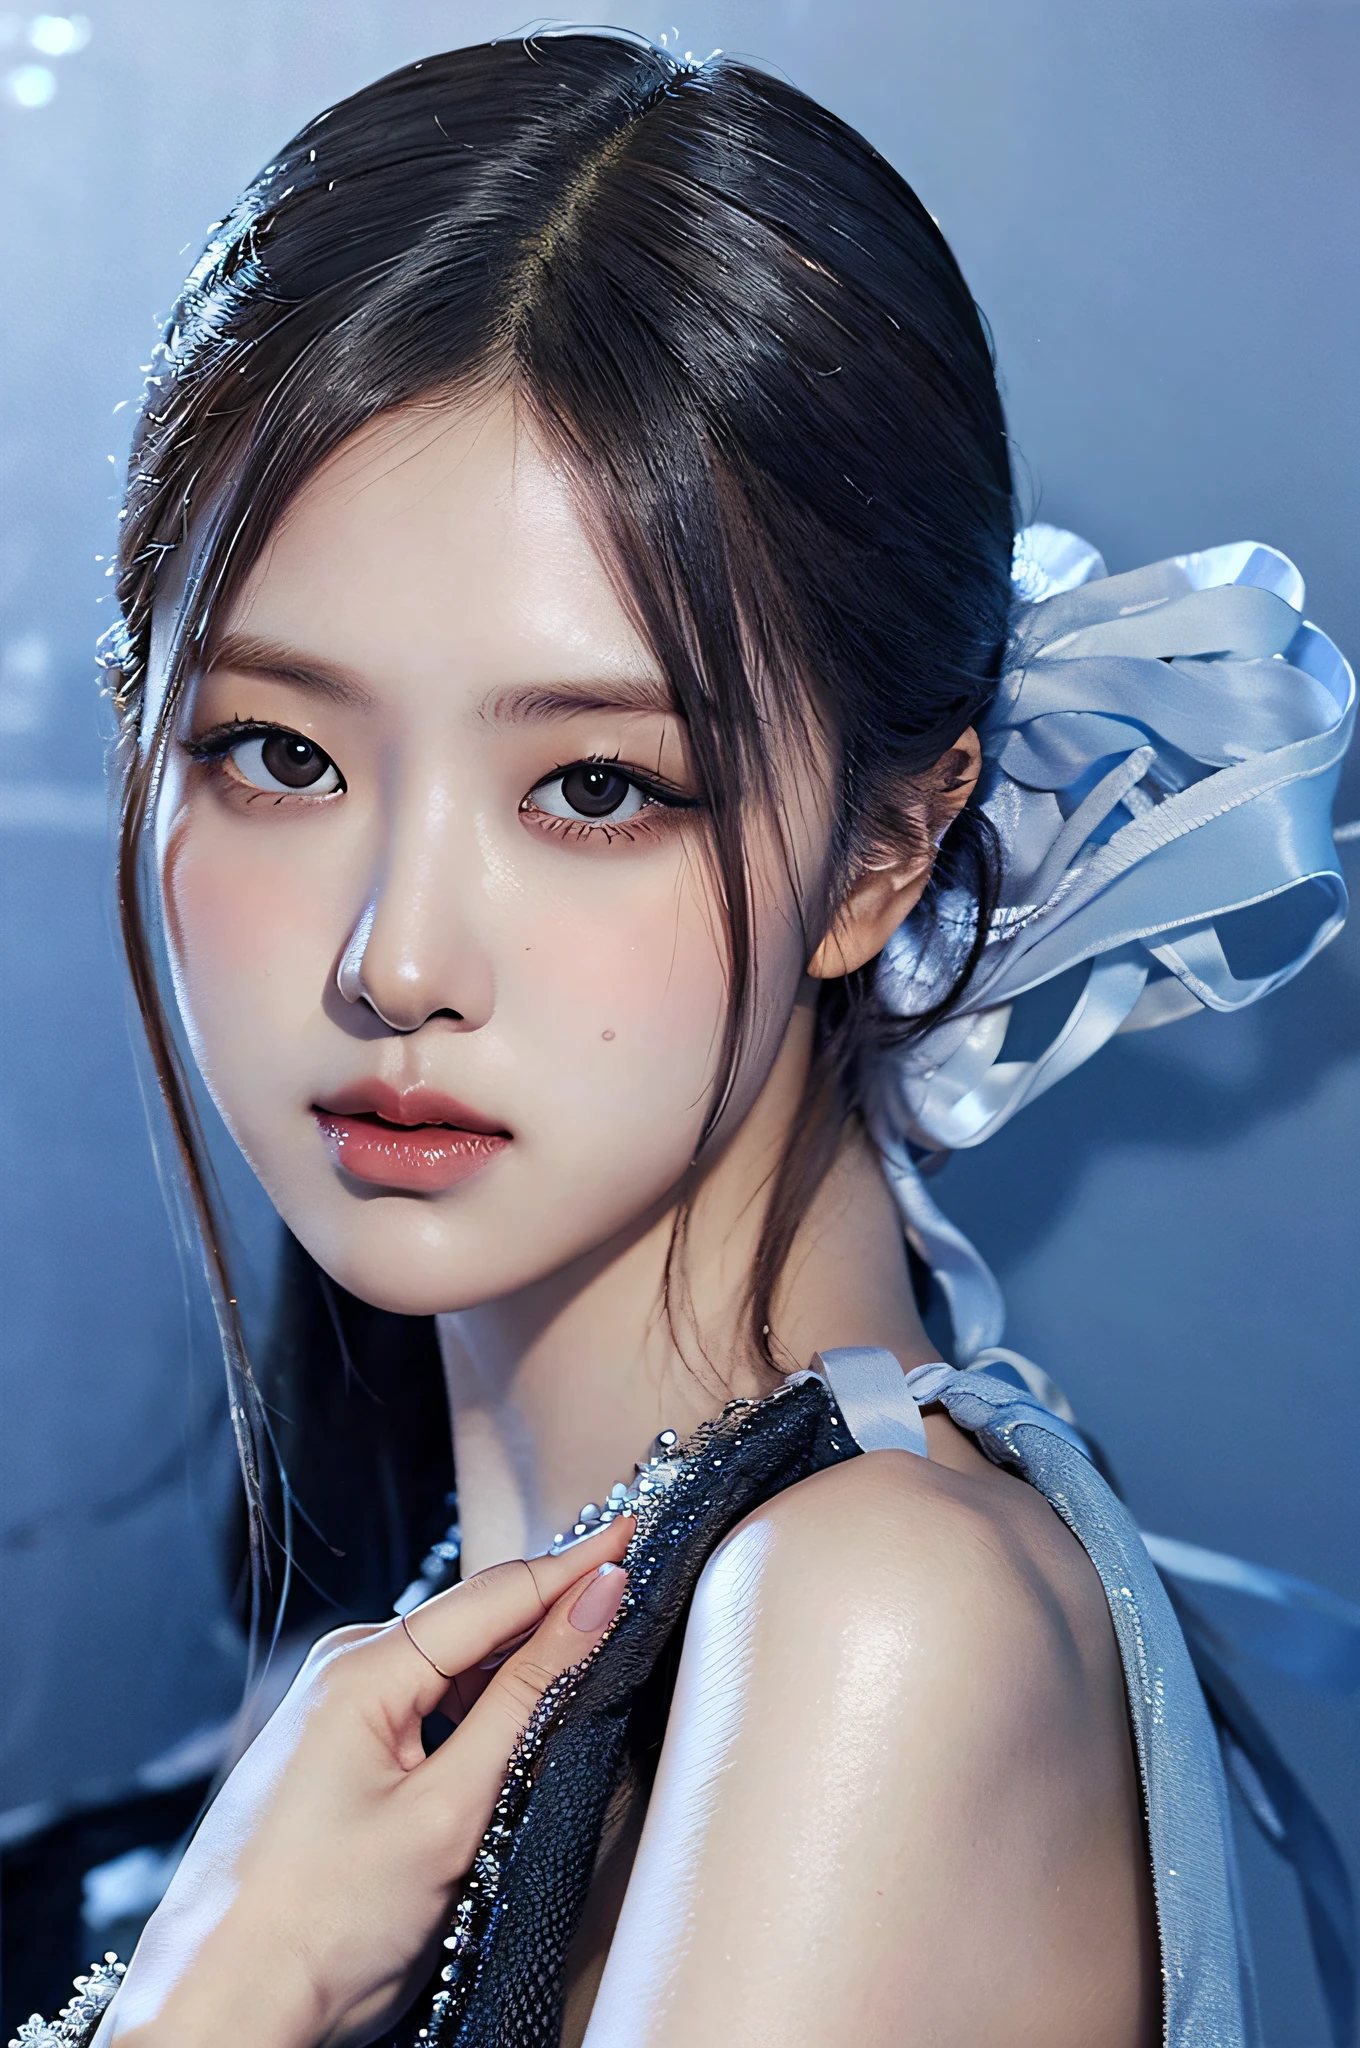 Best Quality, Masterpiece, Ultra High Resolution, (Realistic: 1.4), Original Photo, Official Art, Wallpaper, Bust Photo, Solo, Skin, Black Eyes, Detail, 1 Girl, Beautiful Facial Features, Breeze, Photography, Happy, (Pure blue background), Studio light, Make up Portrait,